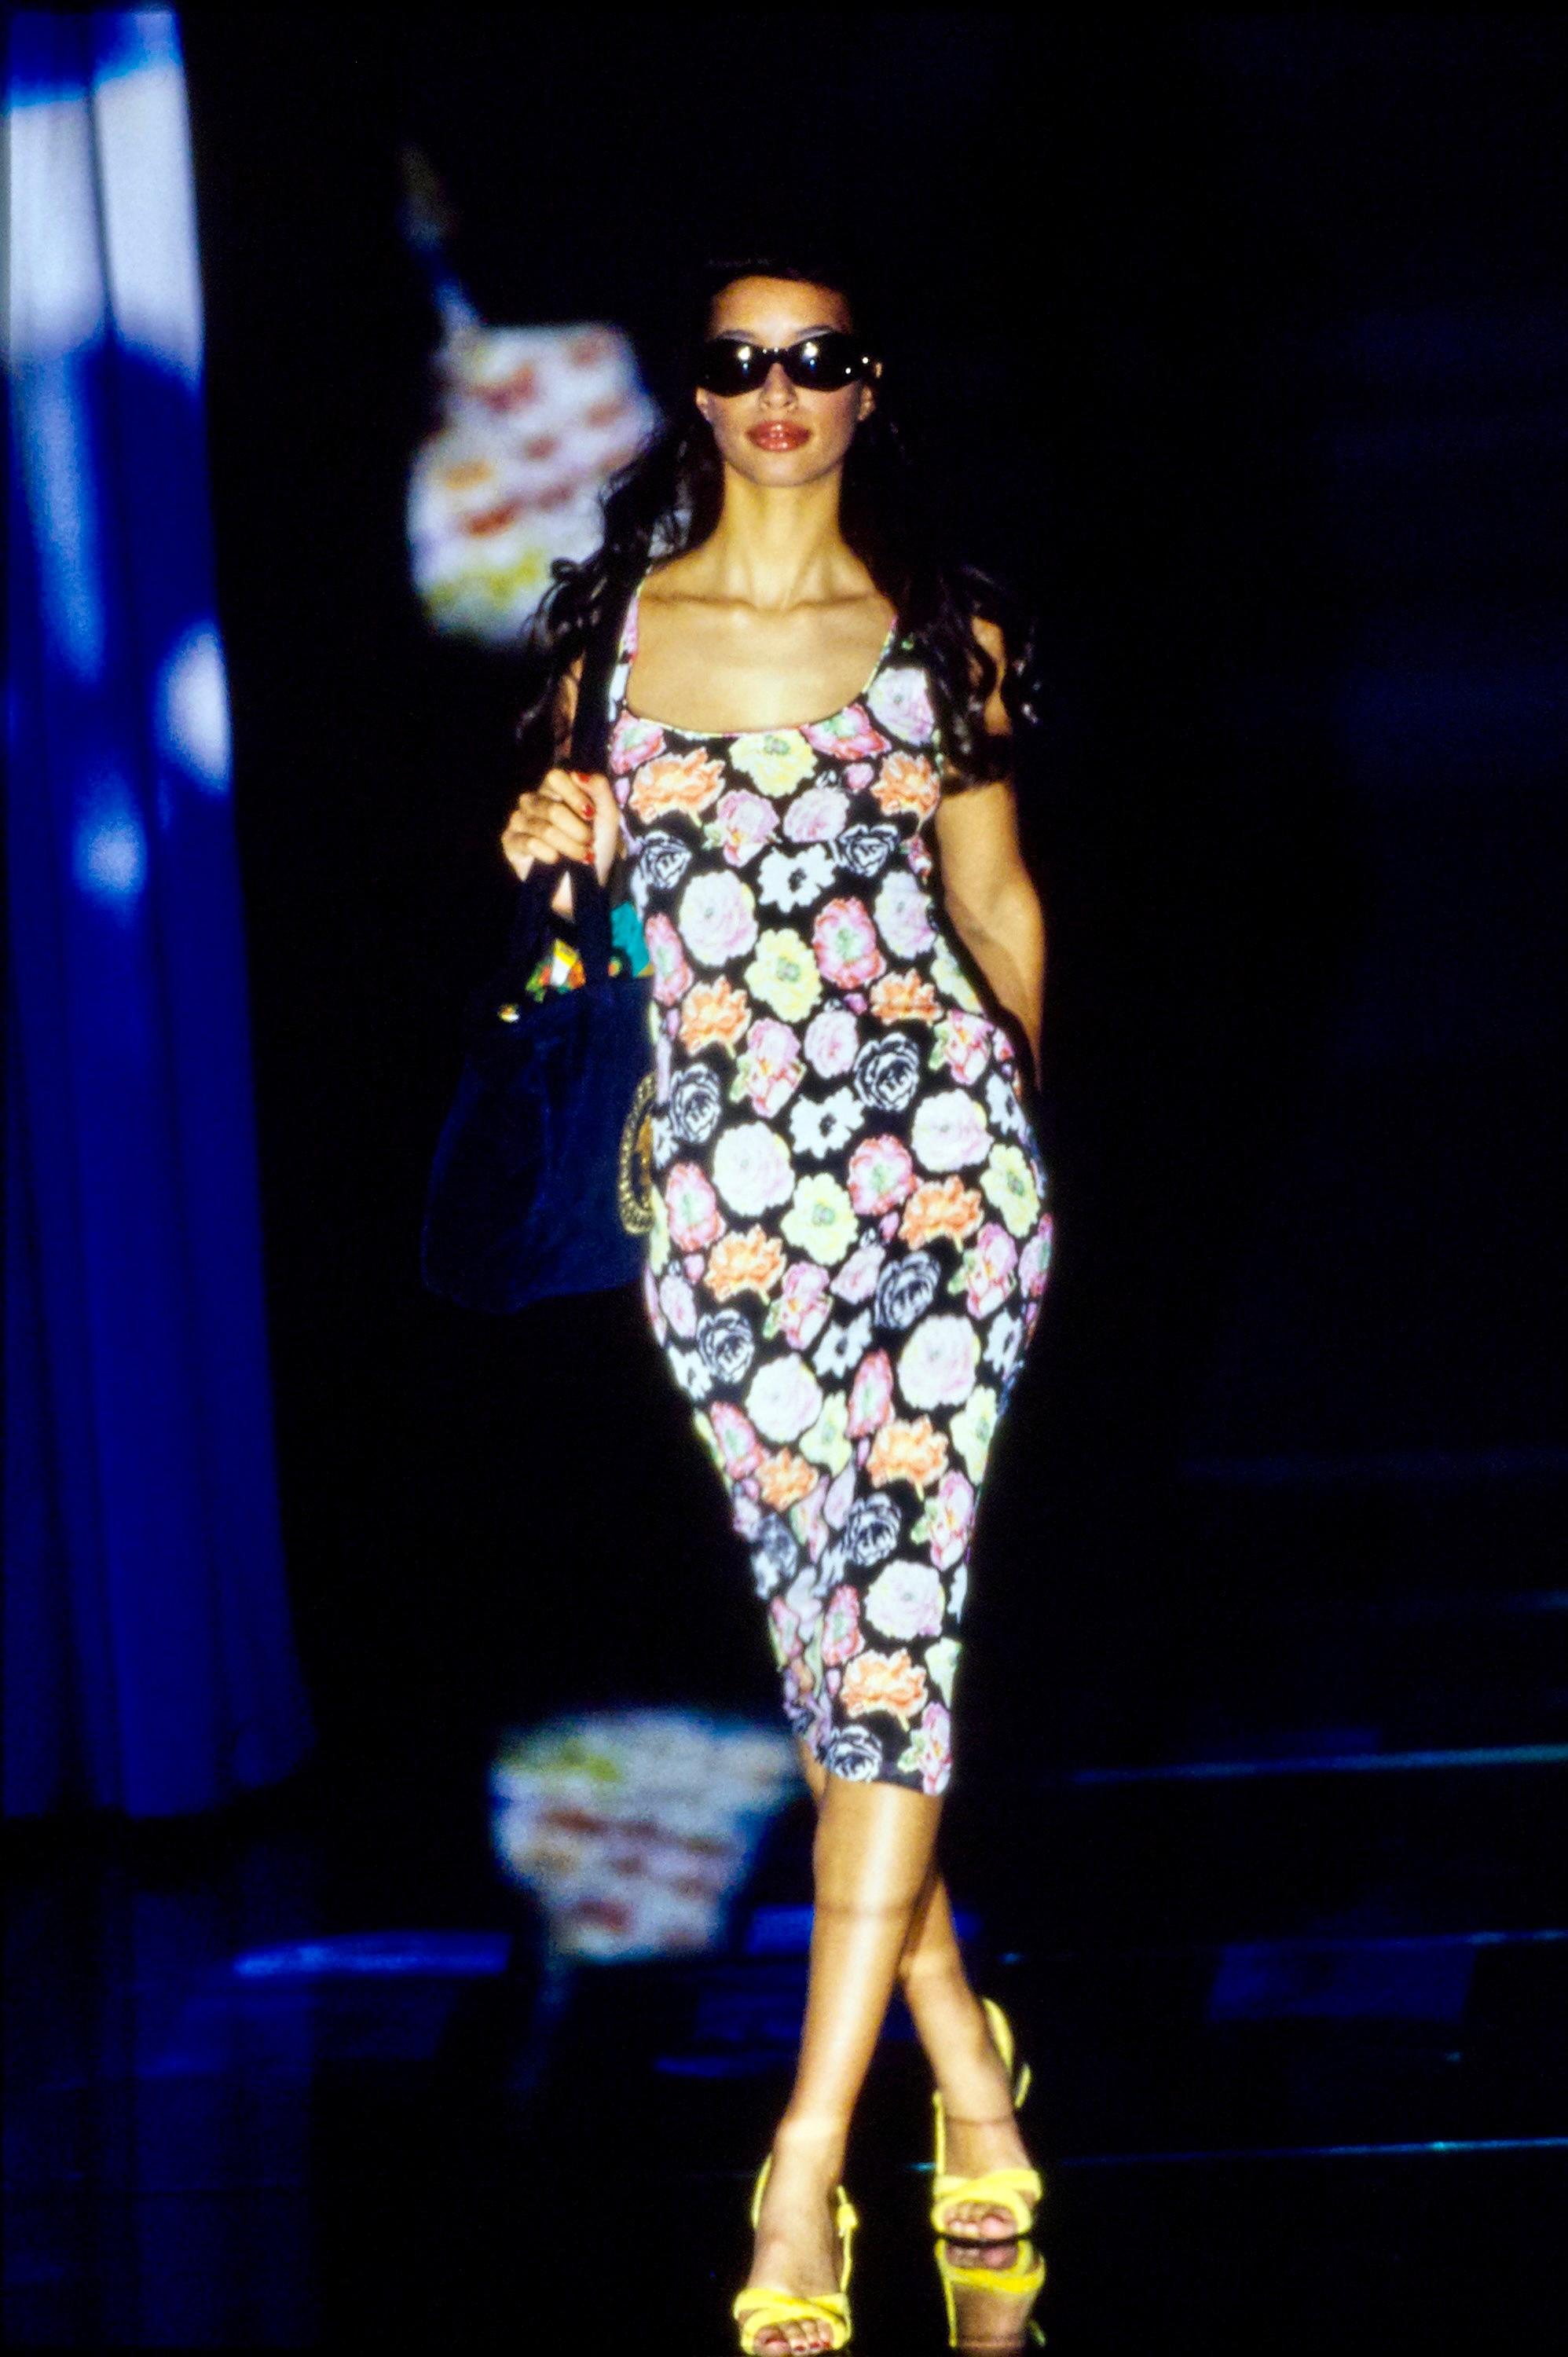 Presenting a runway-ready floral-print semi-sheer stretchy Gianni Versace slip dress. This piece debuted on Brandi Quinones on look 11 of the S/S 1995 runway presentation. Gianni described this collection as 